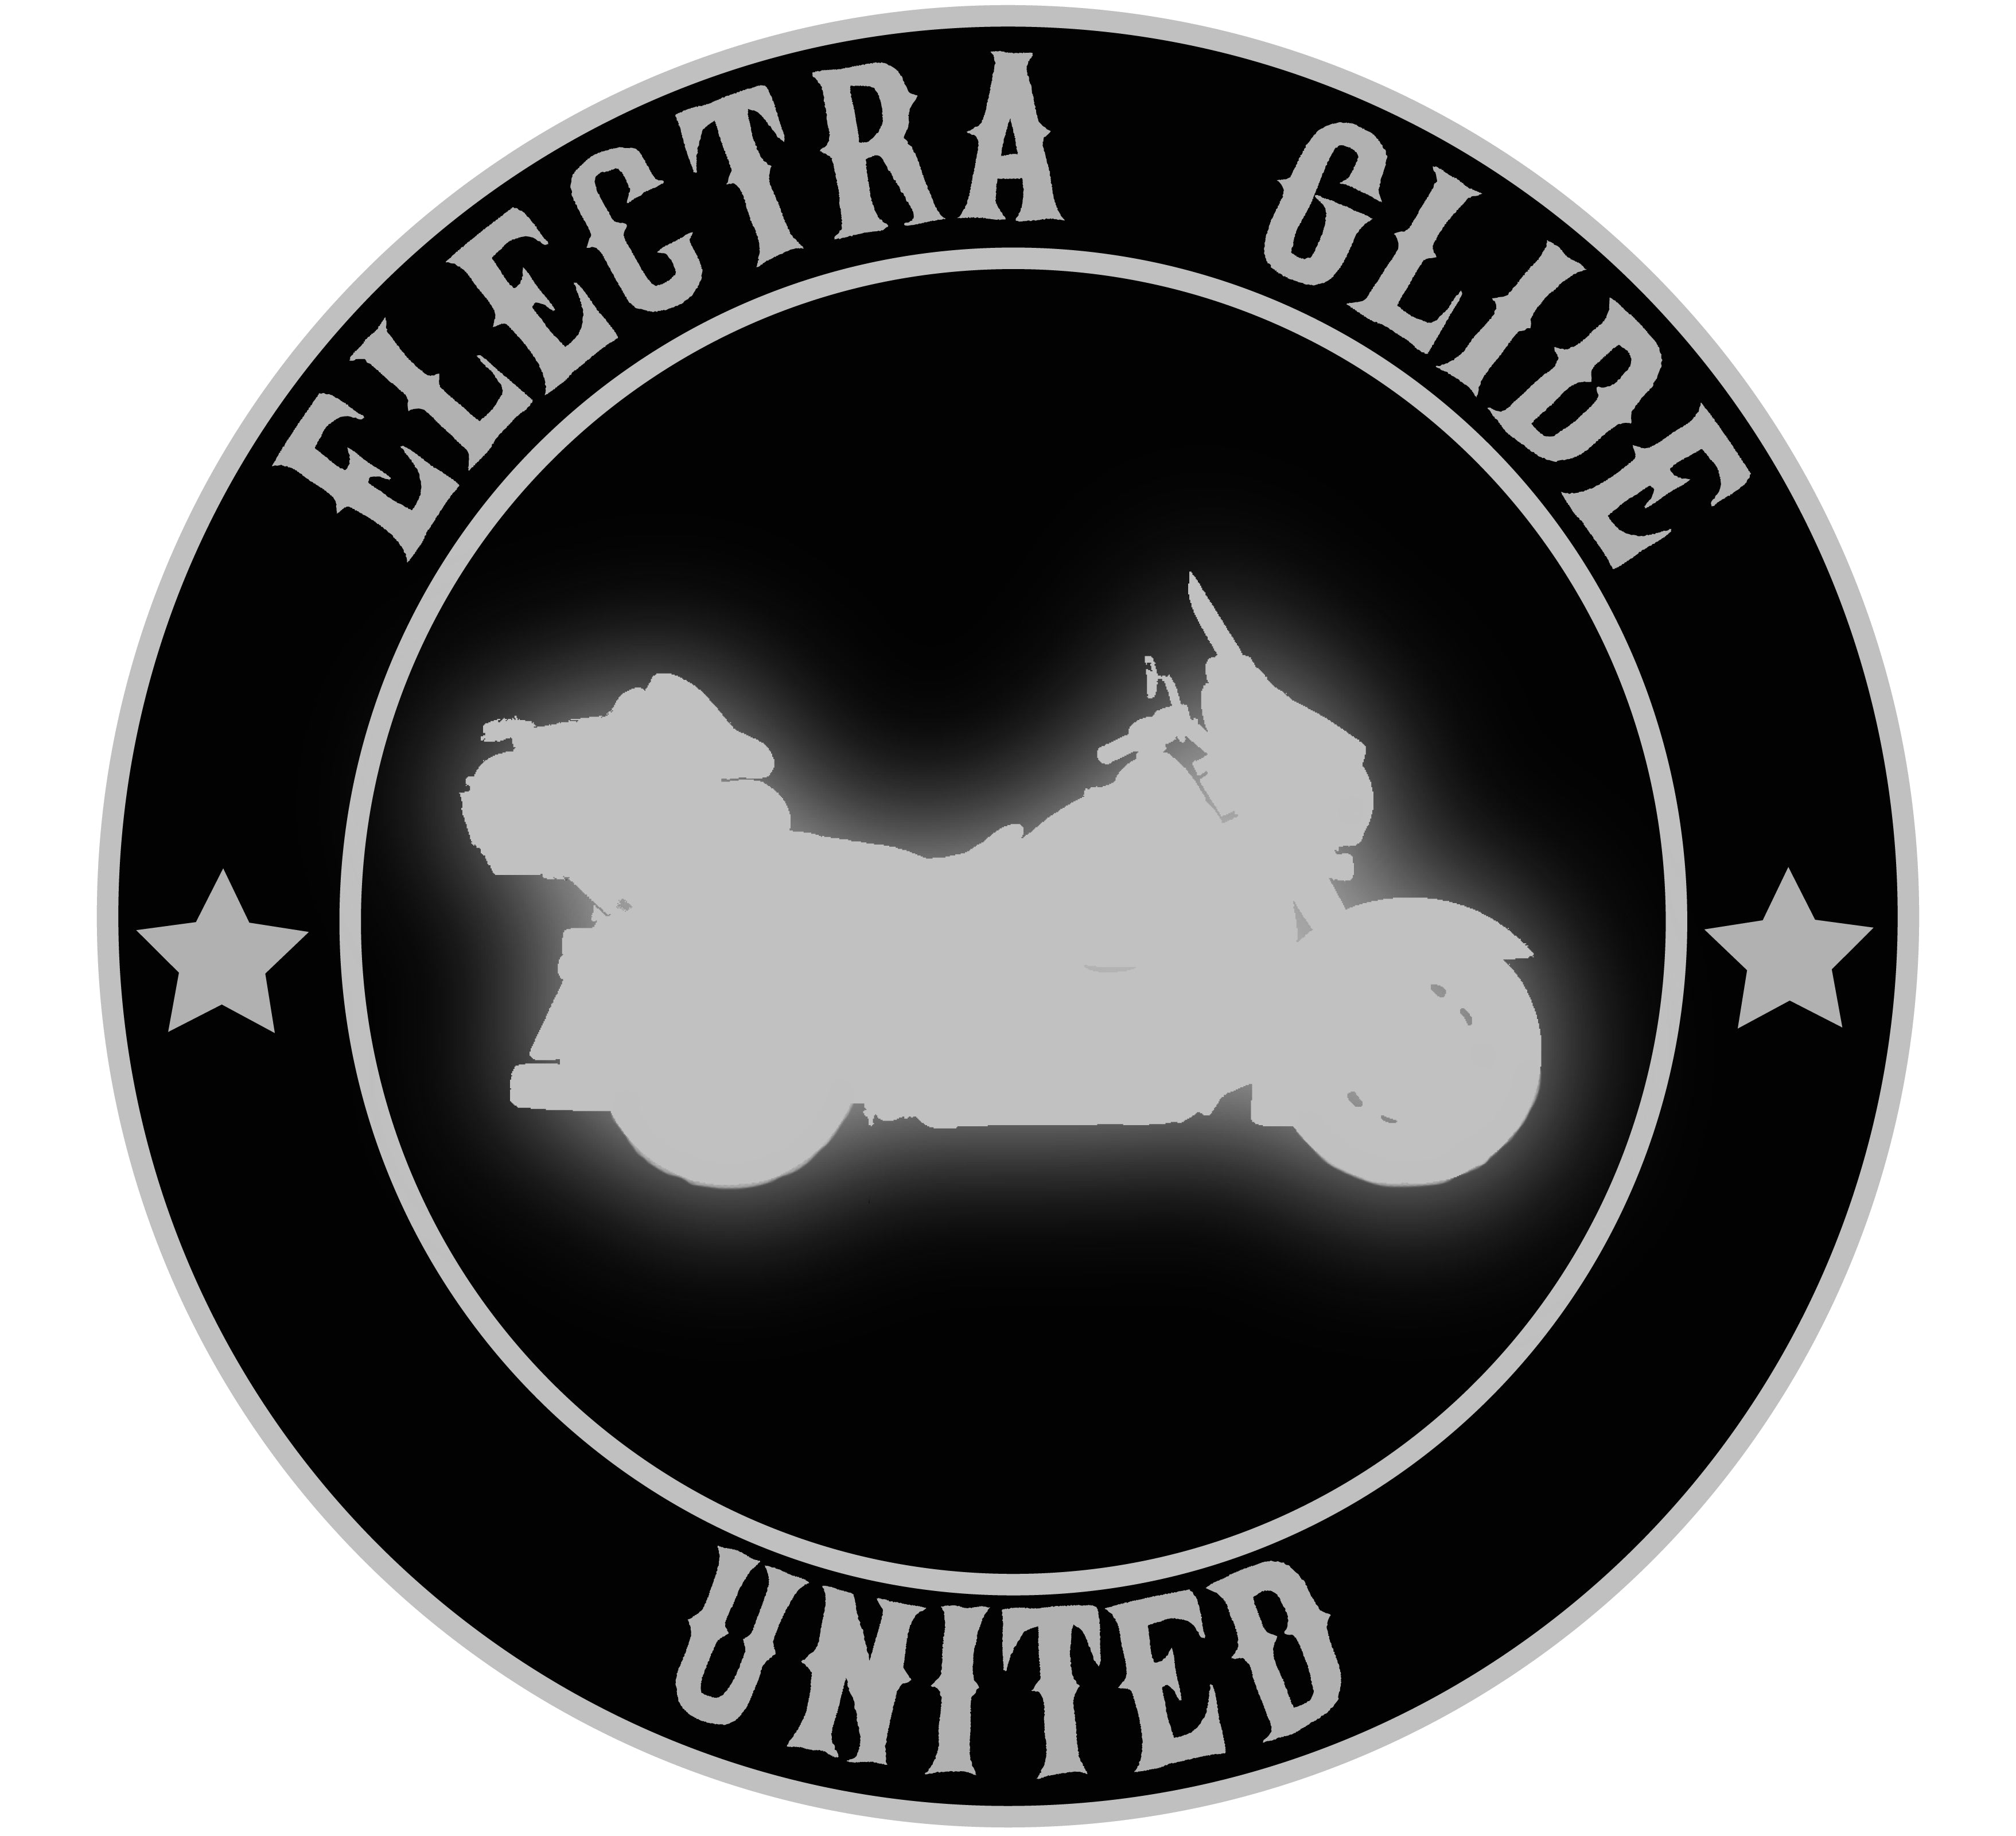 Electra Glide 3.5" Decal (Choose Color)